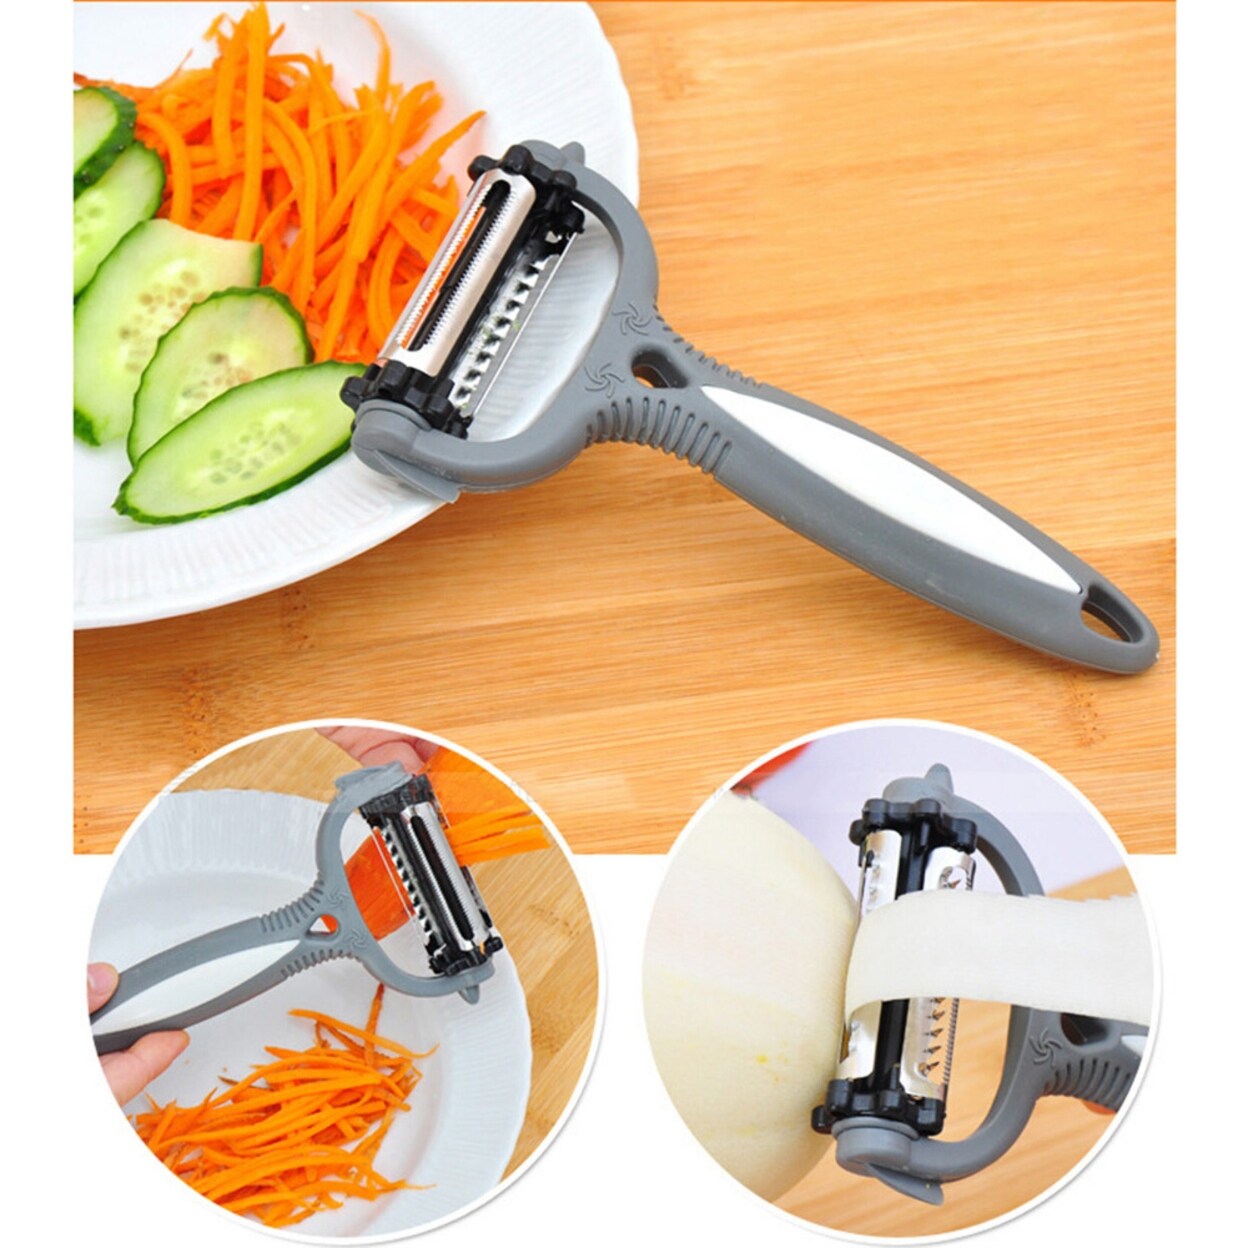 https://ak1.ostkcdn.com/images/products/is/images/direct/8f3447160b4f39c2345507198980aca7f35d576d/Multifunctional-360-Degree-Rotary-Carrot-Potato-Peeler.jpg